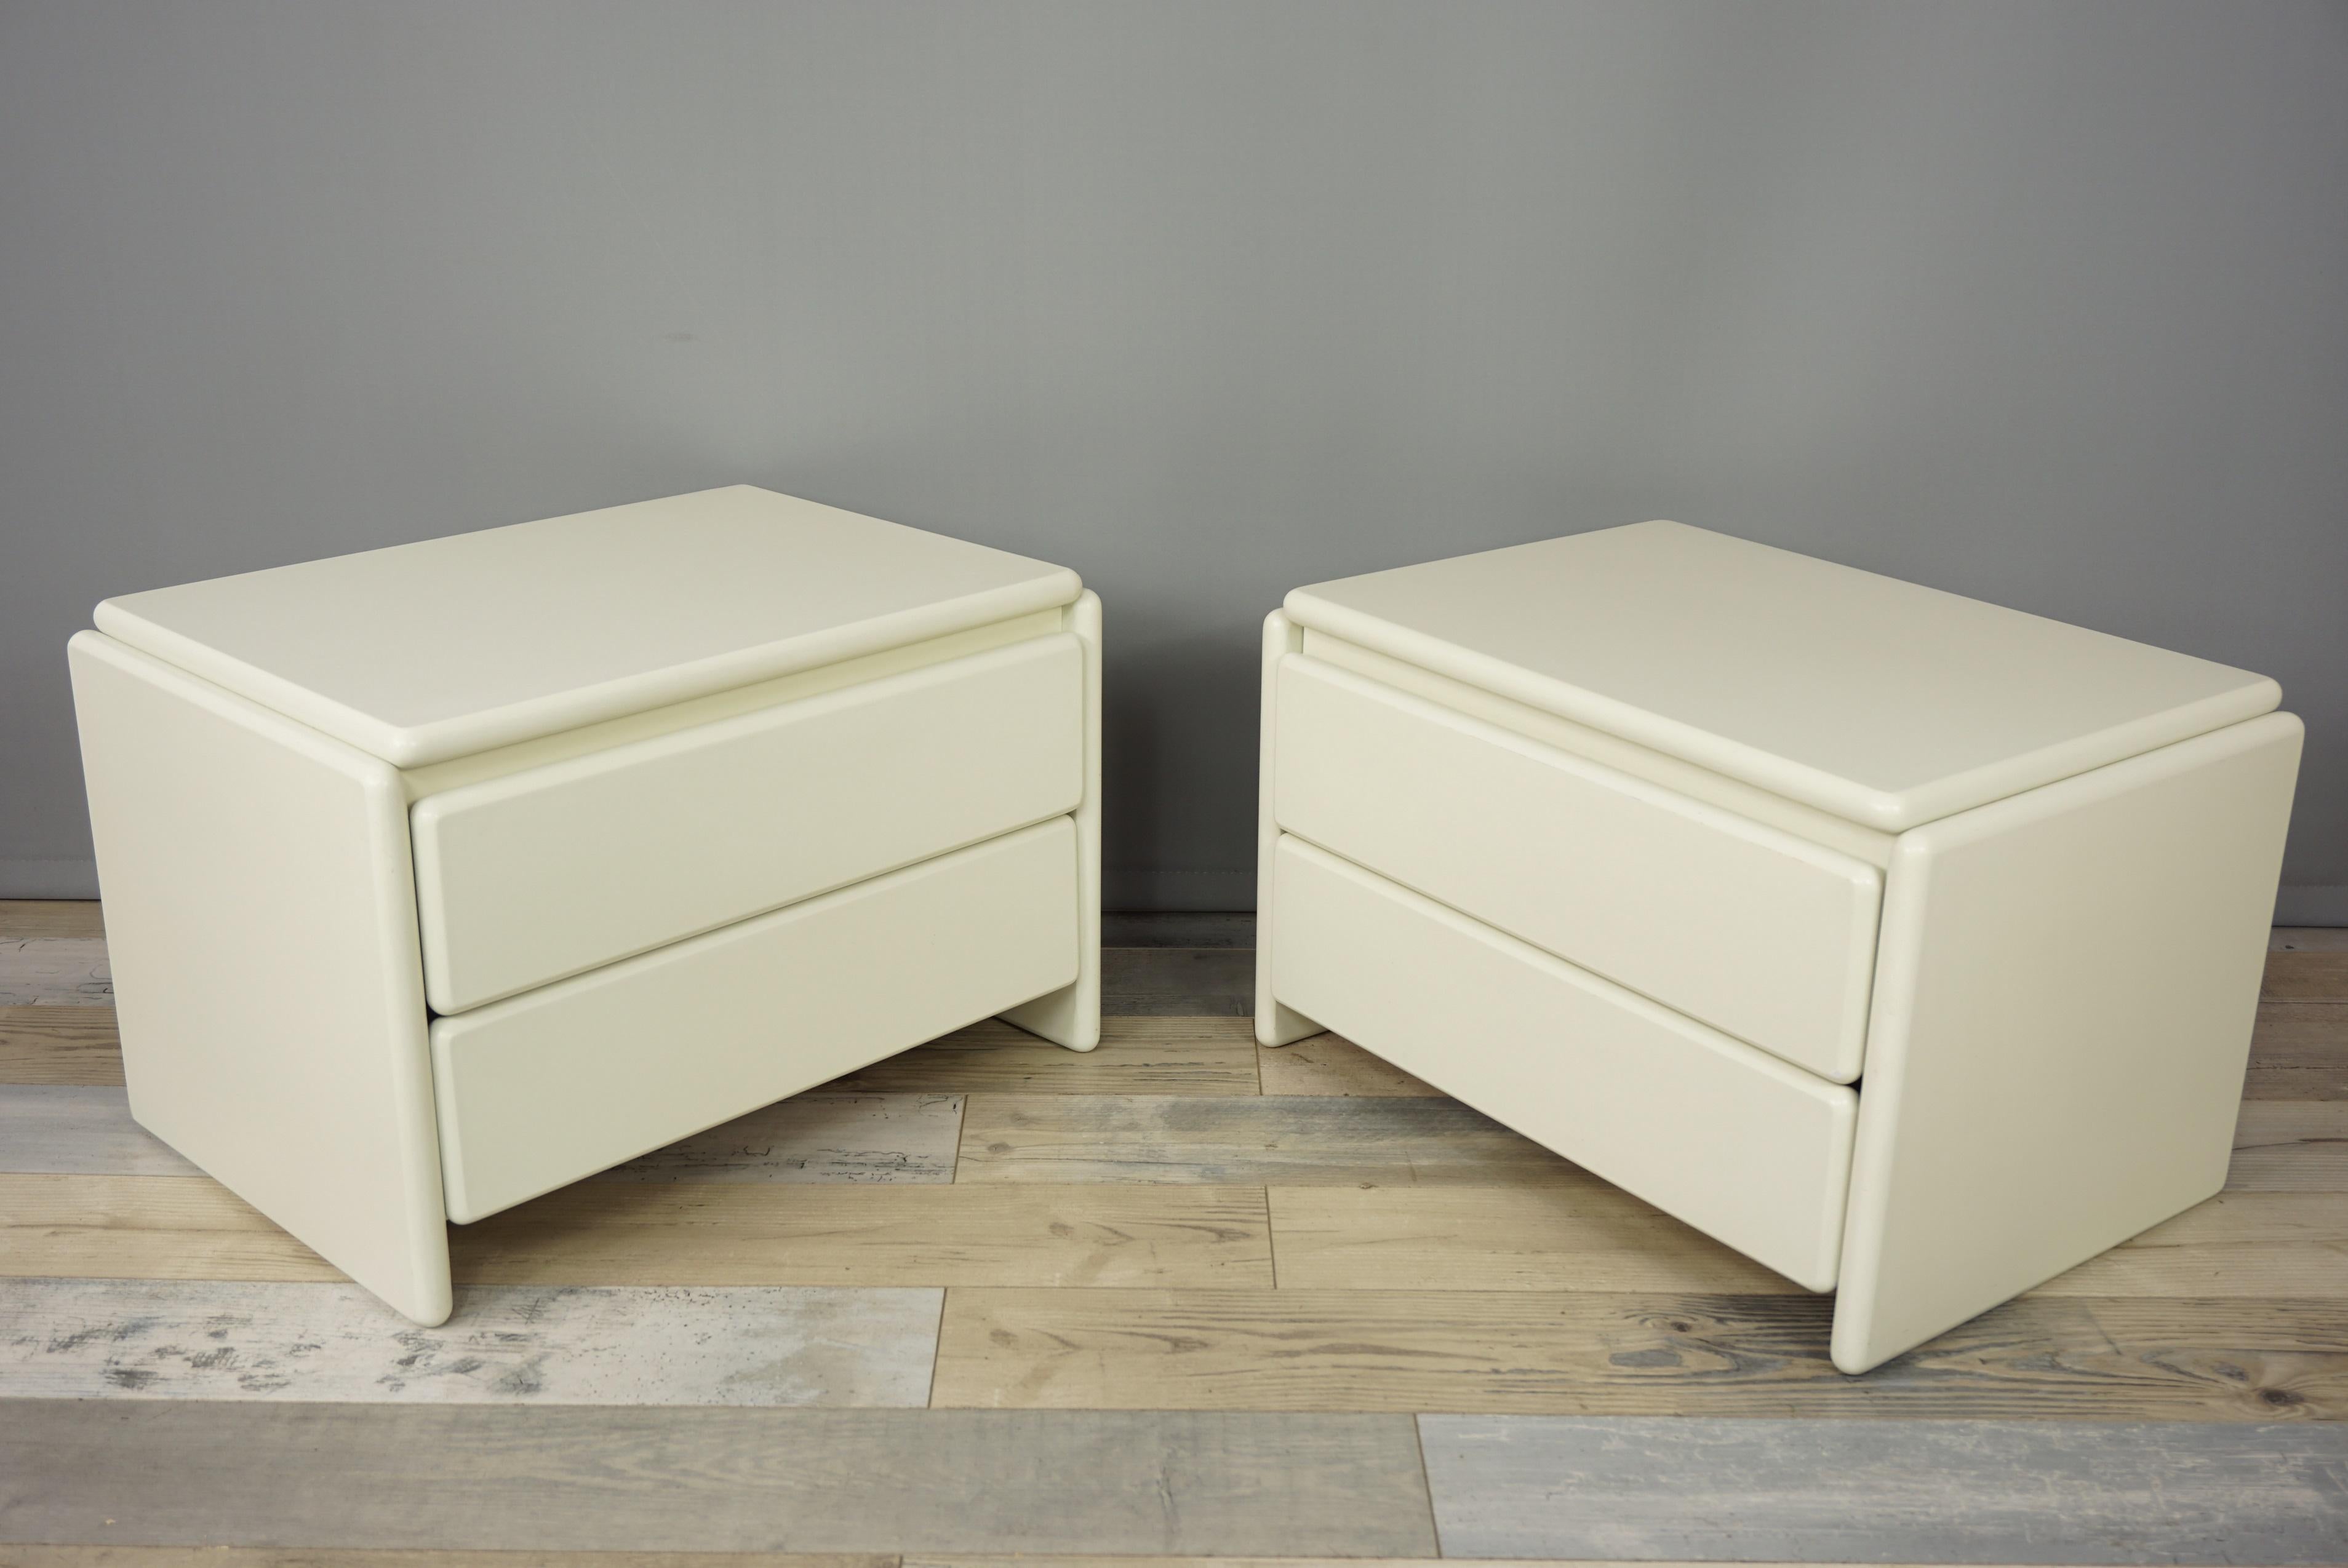 Pair of warm white lacquered wooden bedside tables from the 1980s slightly different dimensions (H 35cm / W 53cm / D 37cm ; H 33cm / W 53 / D 37cm, one for Him and one for Her ) in excellent state of conservation.